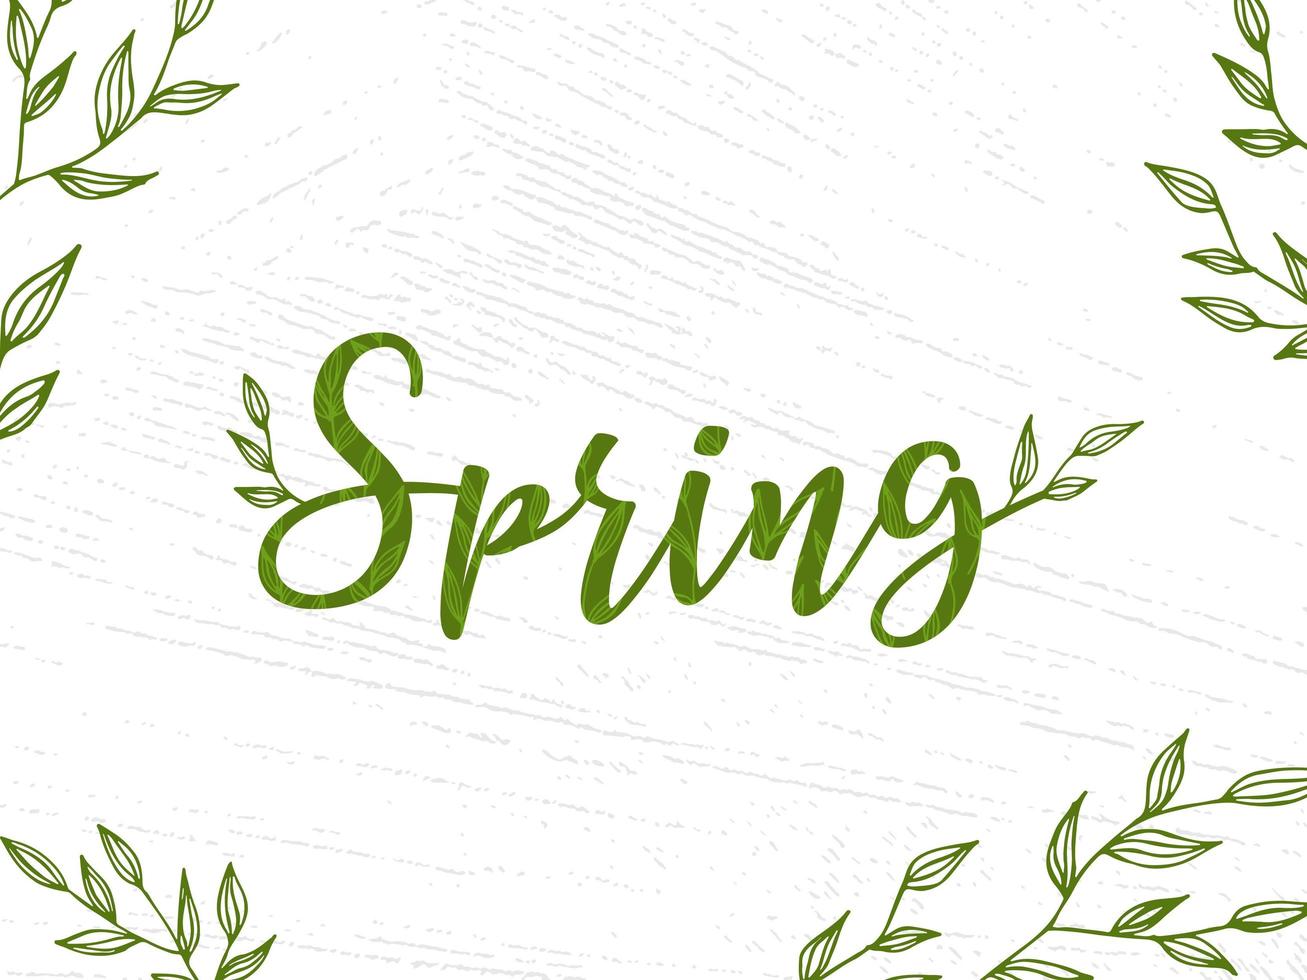 Spring lettering. Vector illustration with texture on a white background. A frame of green branches and leaves.